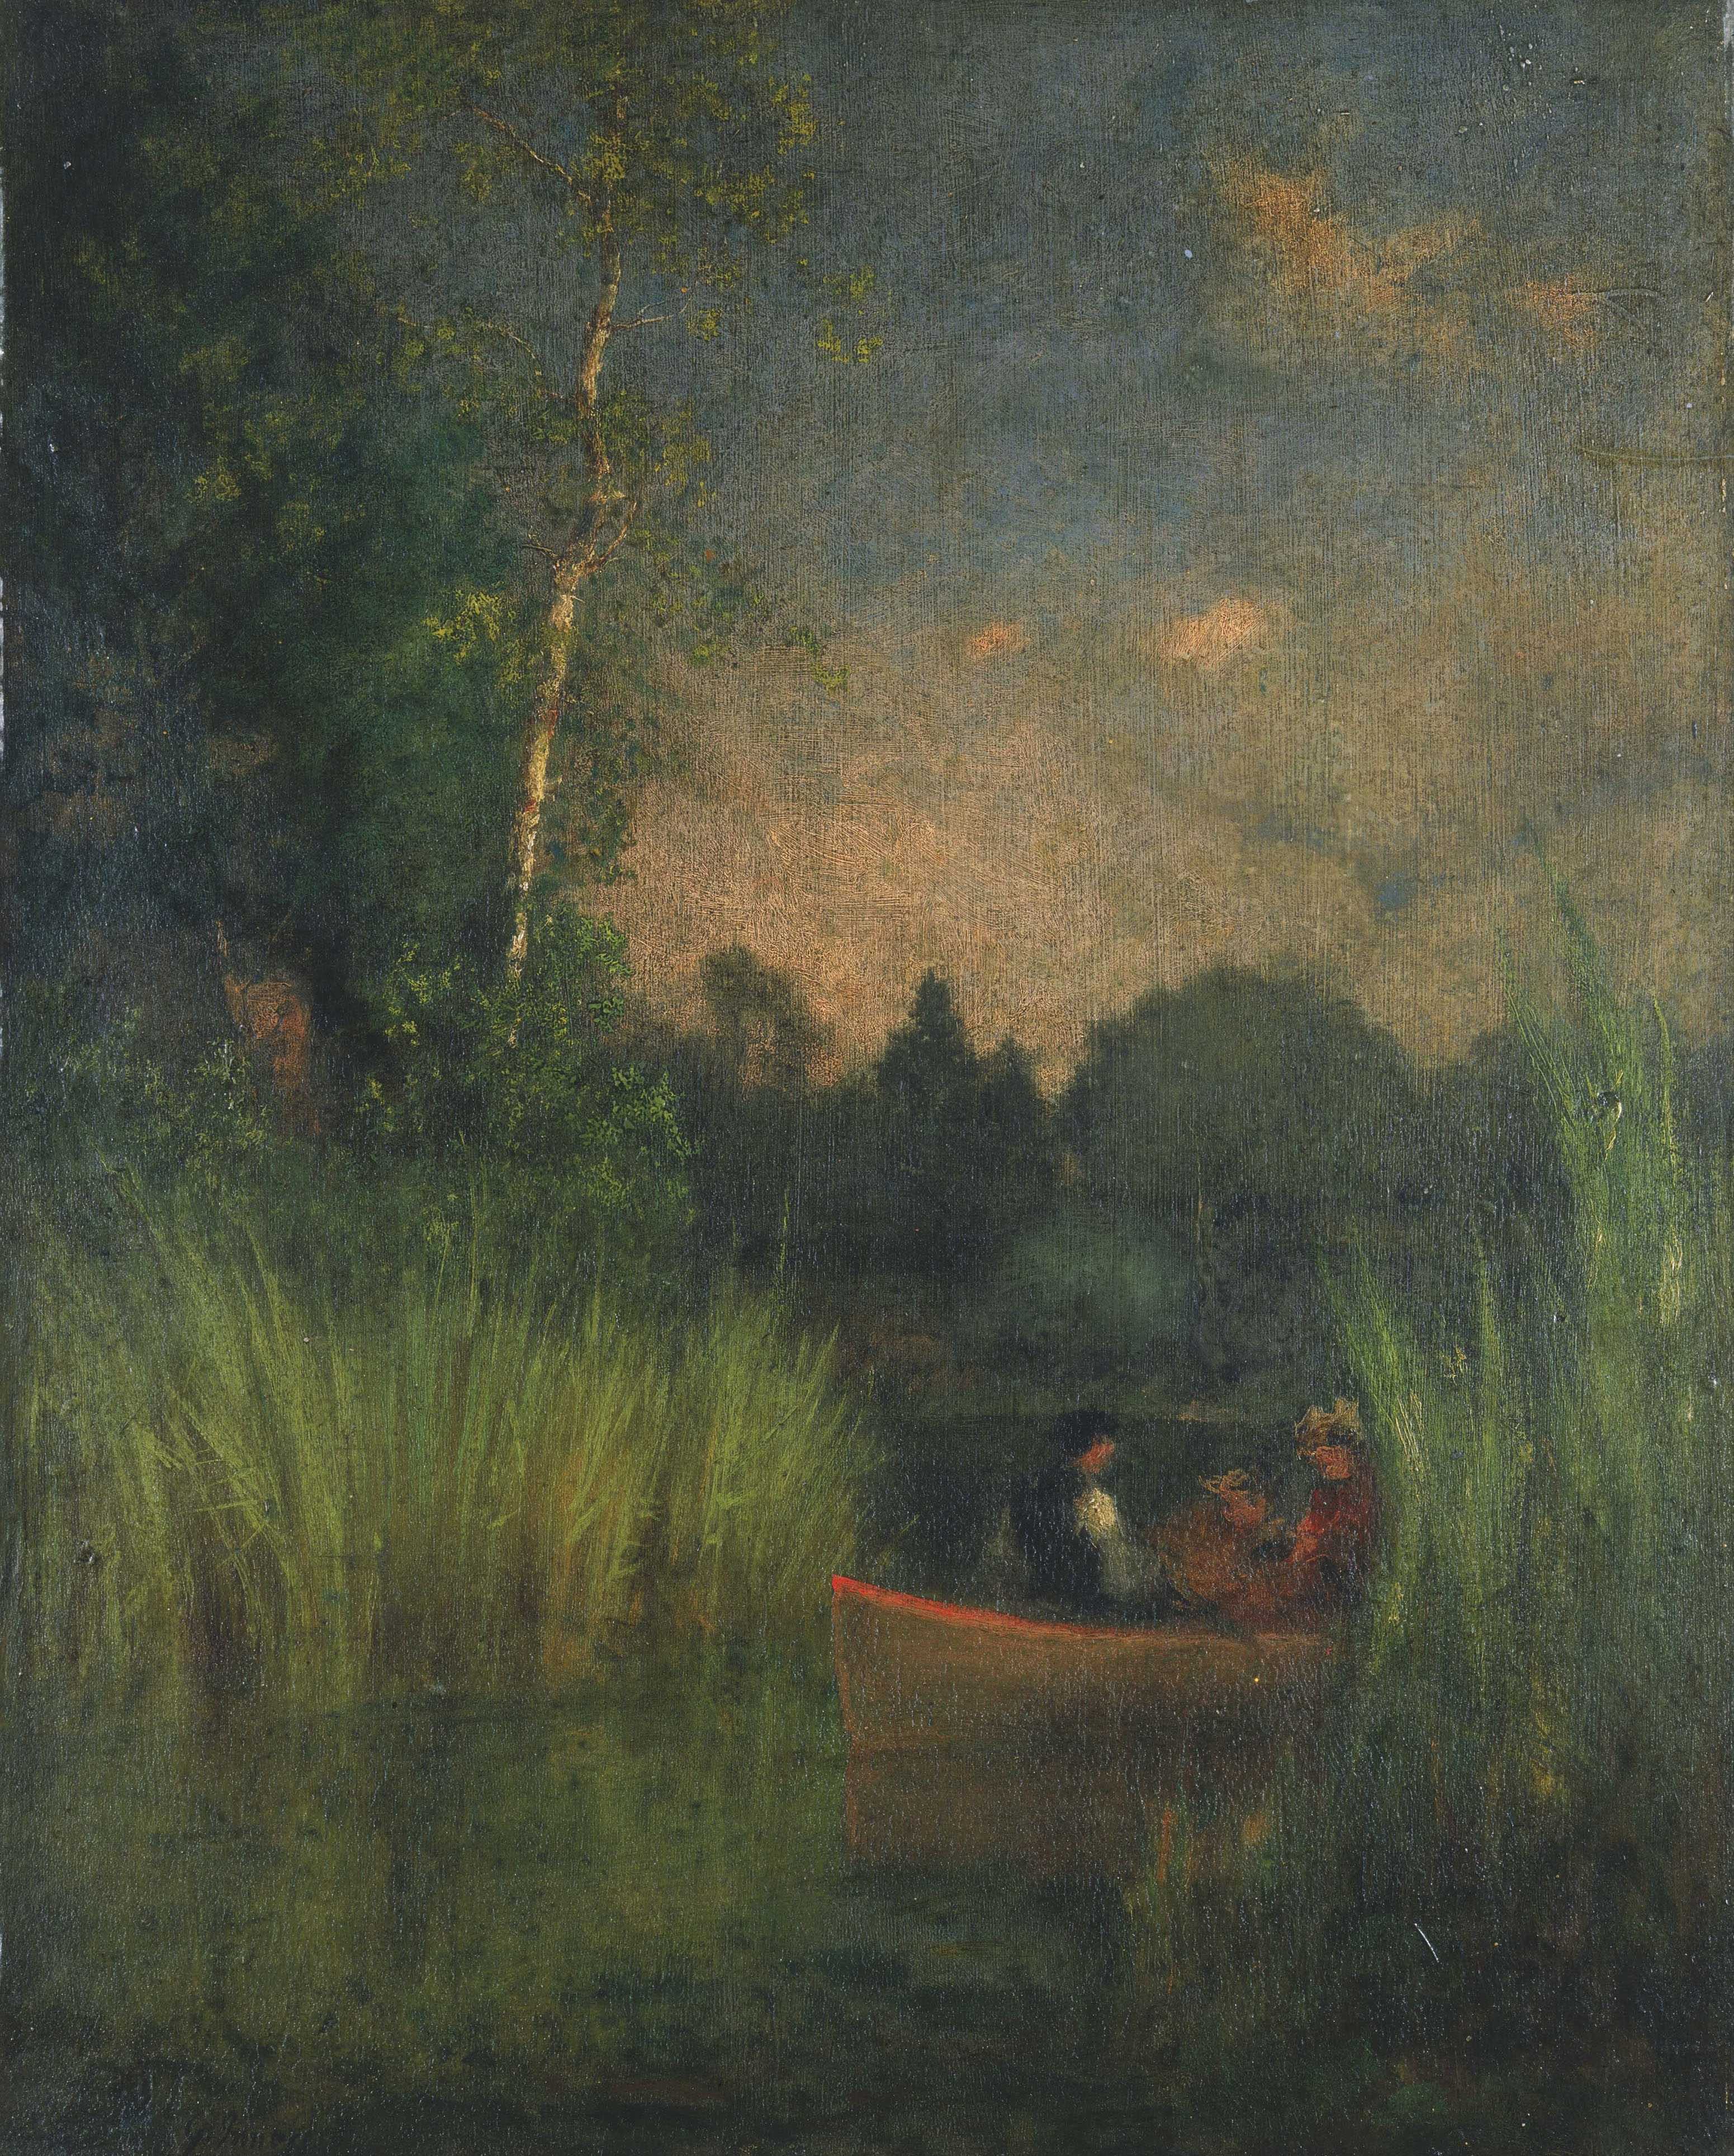 Find out more about George Inness - Dusk in the Rushes (Alexandria Bay)